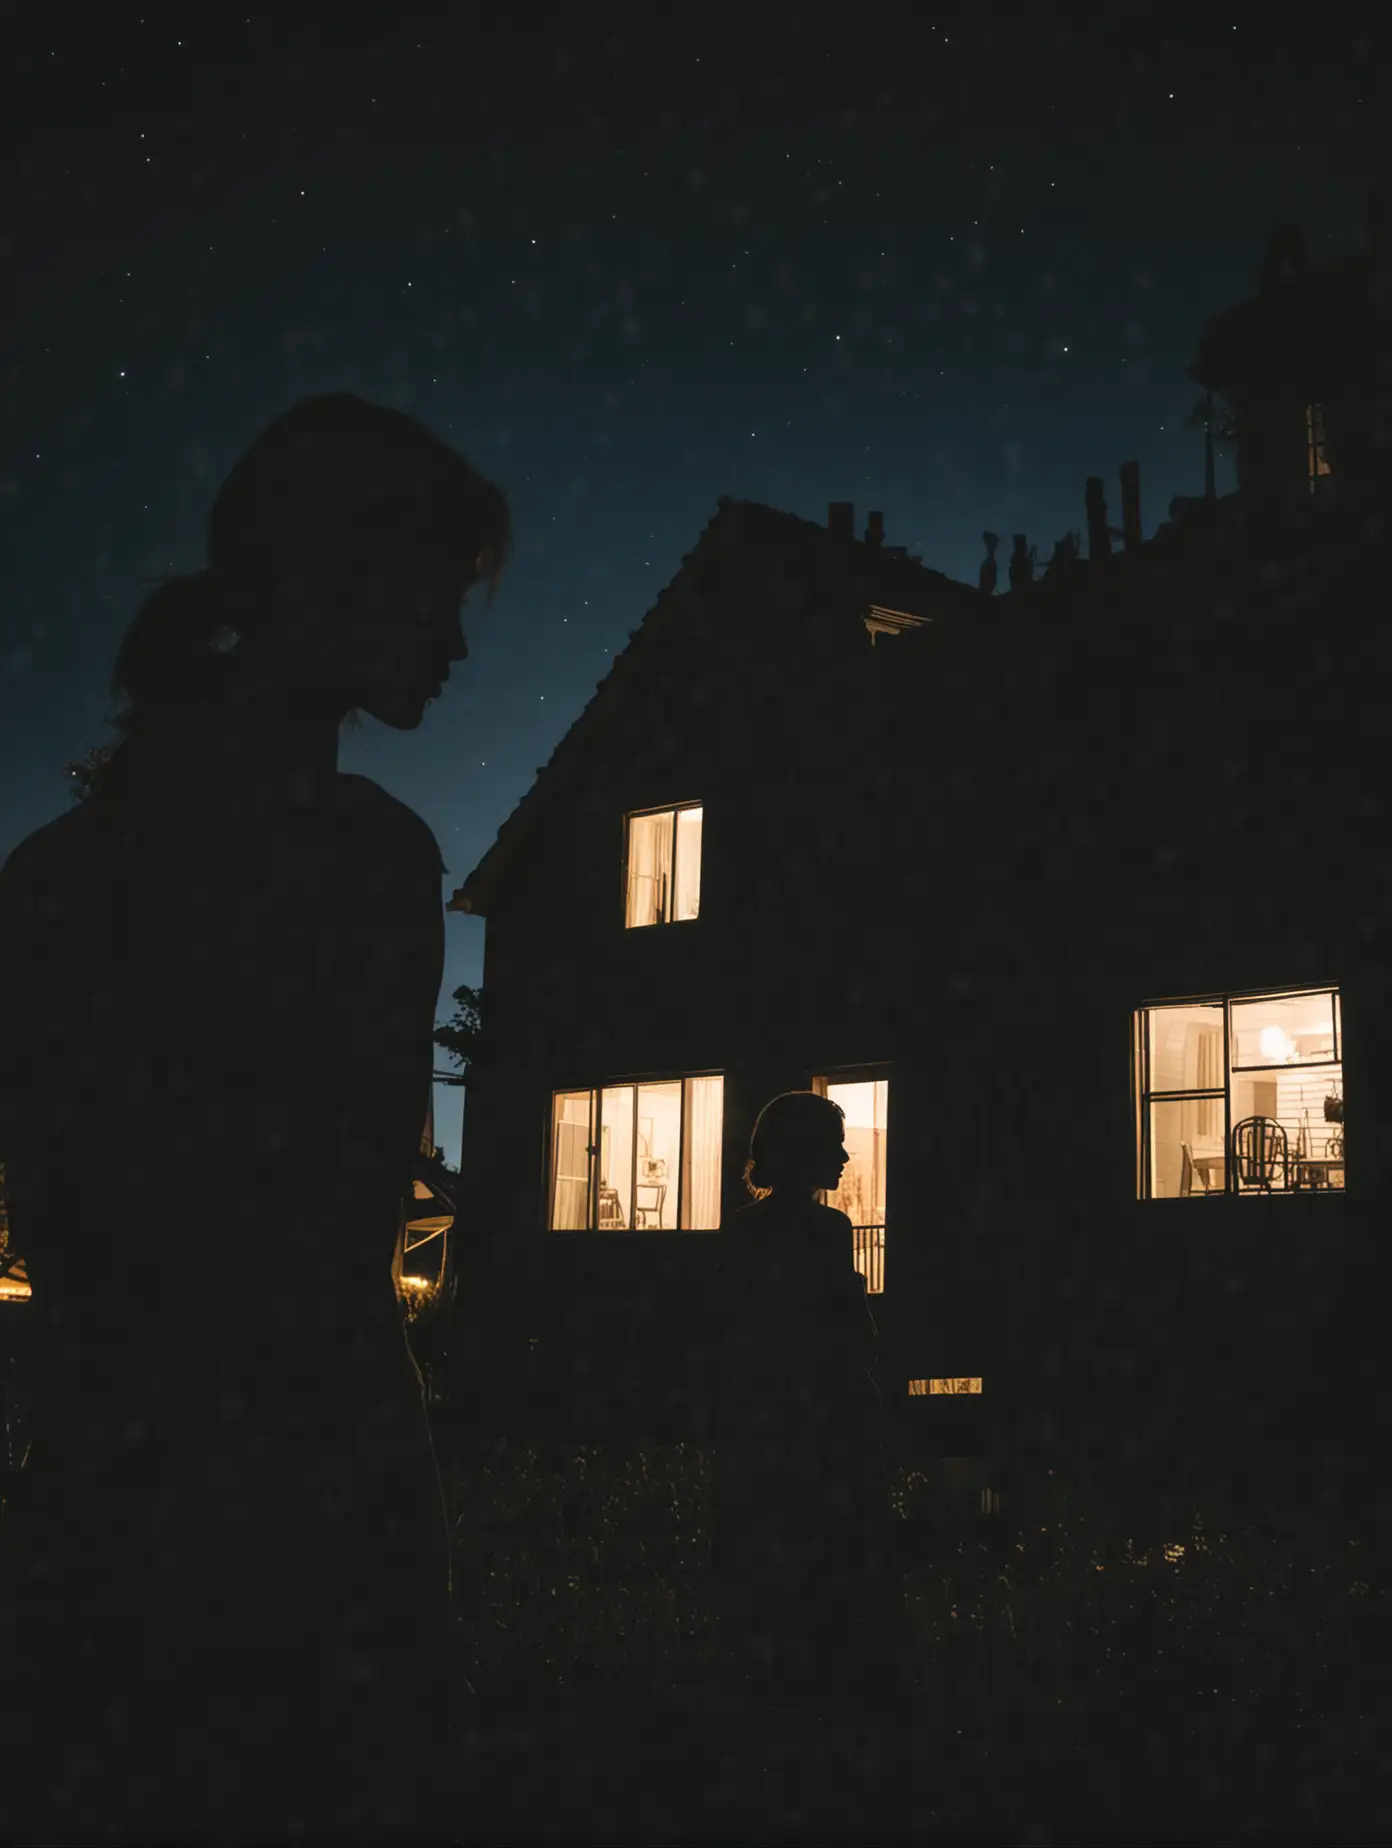 Silhouette of Woman Admiring House at Night